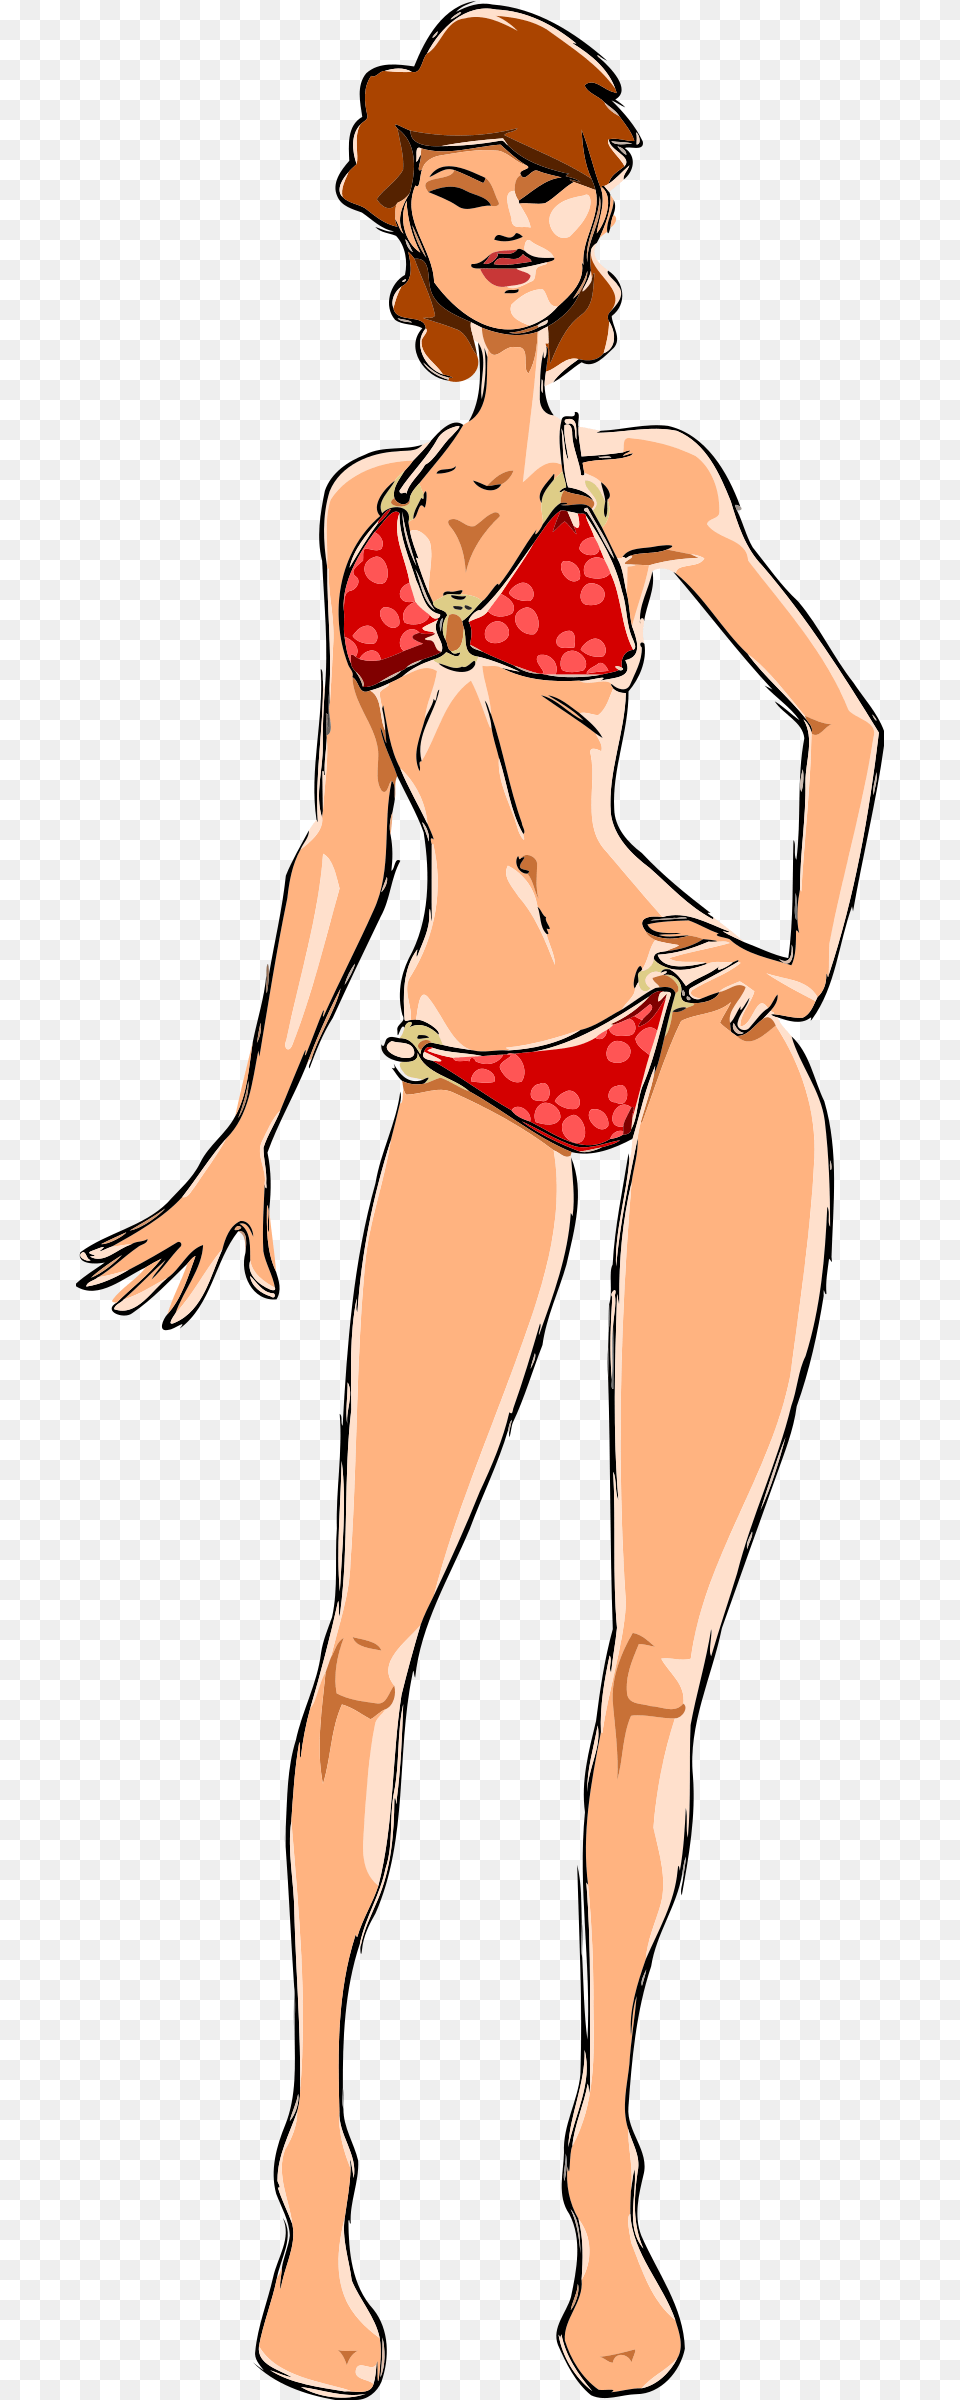 This Icons Design Of Woman In Bikini, Clothing, Swimwear, Adult, Female Free Png Download